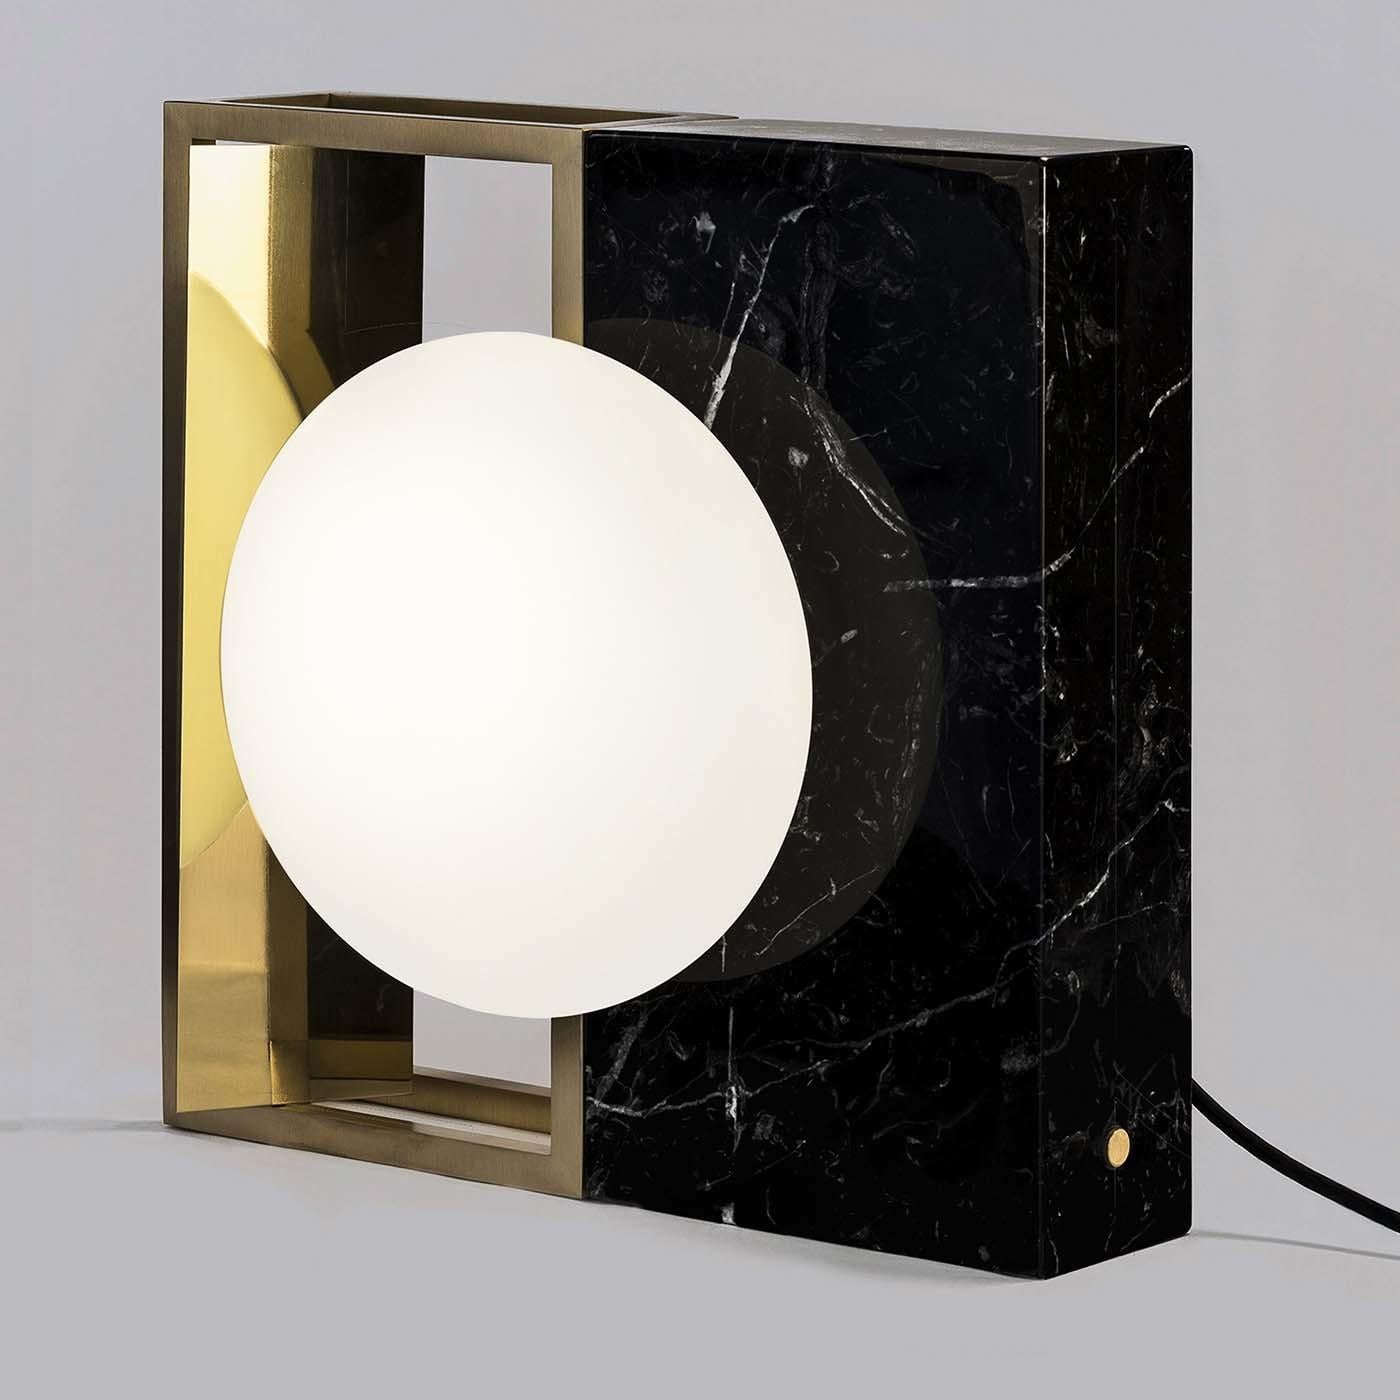 Each lamp by Hagit-Pincovici embodies a multiplicity of forms and textures resulting in an entirely modern work of functional decor. This sculptural lamp features a hand-blown Murano glass orb embedded in a square frame, half as an open brass frame